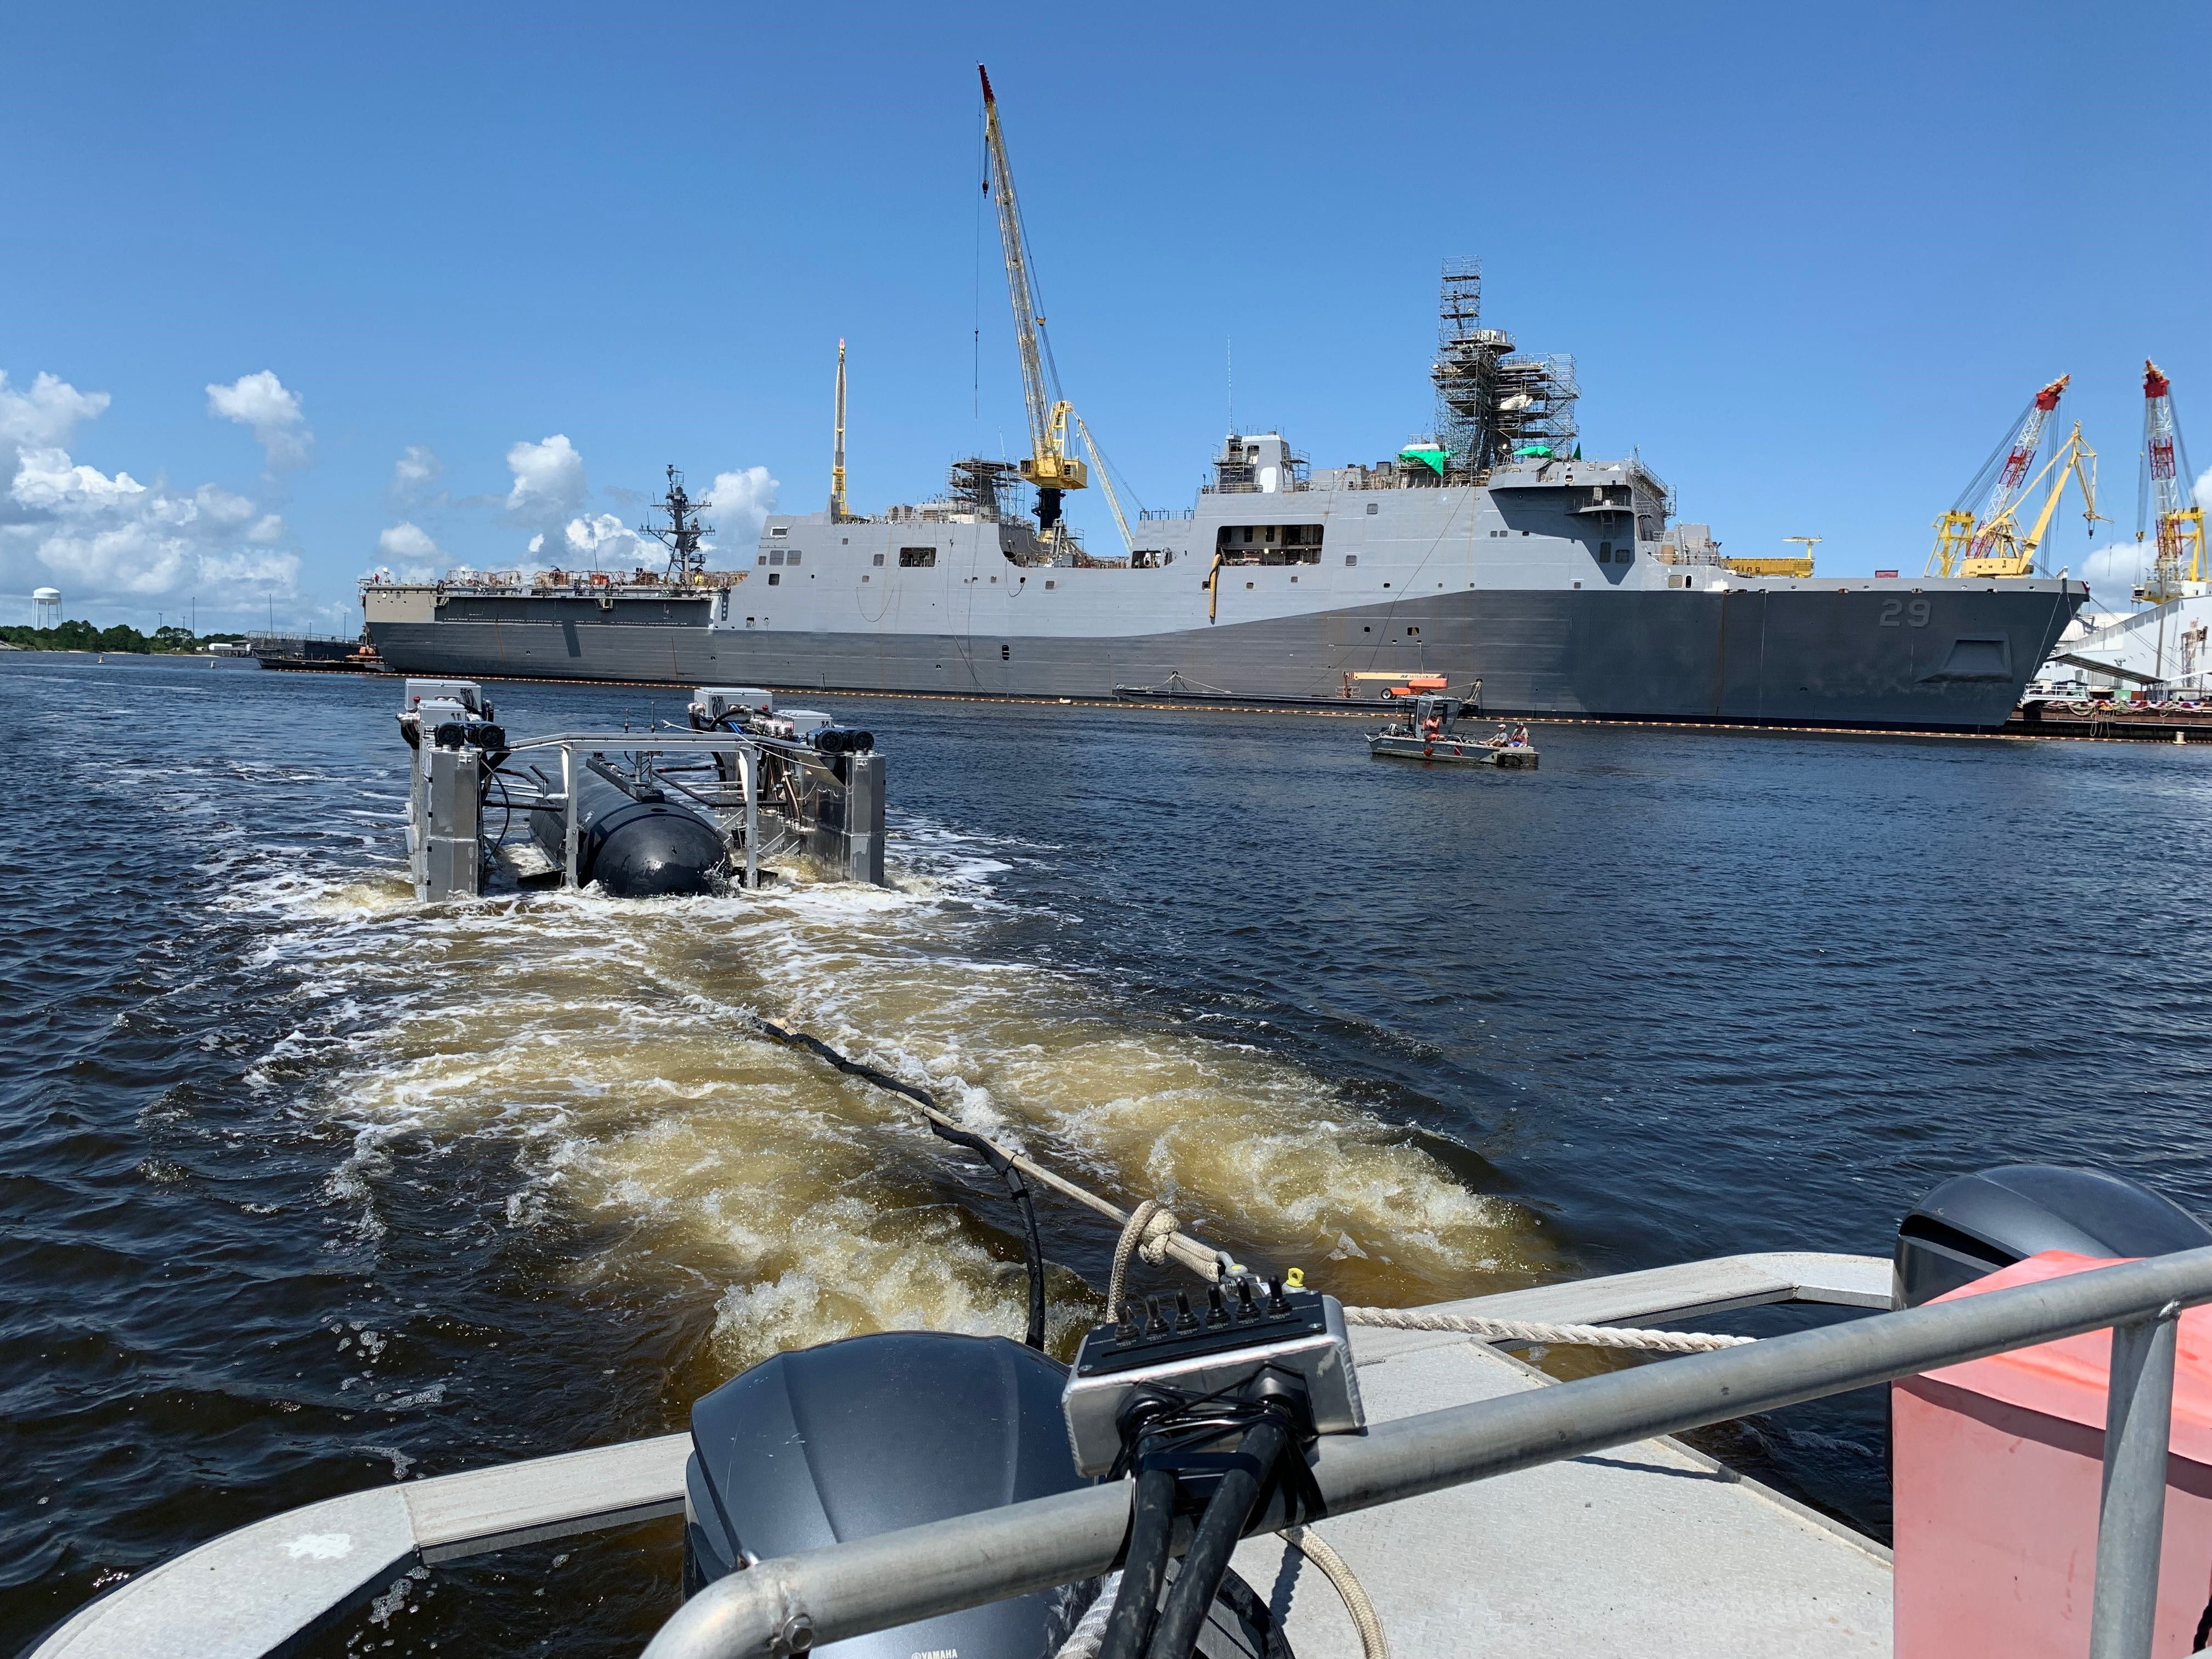 HII’s Pharos prototype platform being towed behind a small craft in the Pascagoula River while recovering HII’s Proteus LDUUV during a demonstration June 8, 2022.